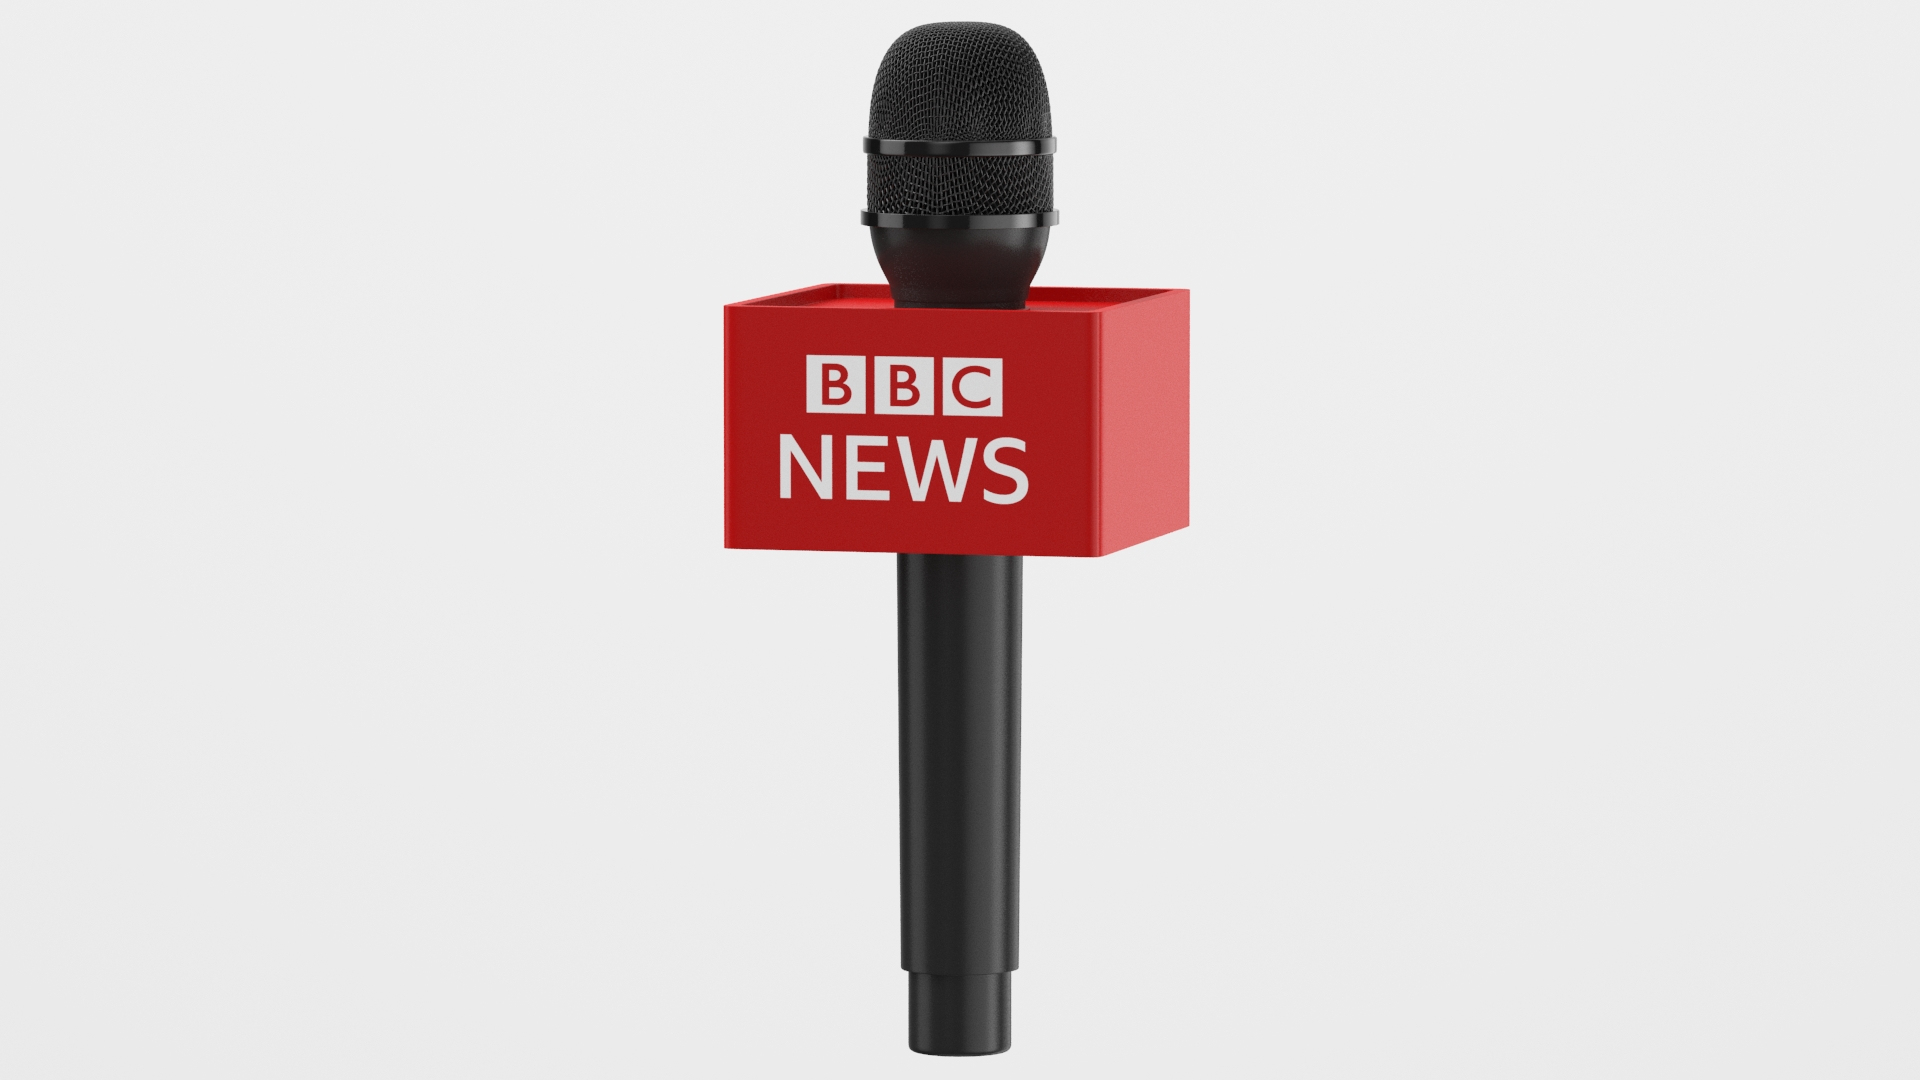 BBC To Launch 5 New HD Channels Incl. BBC News HD & BBC3 HD